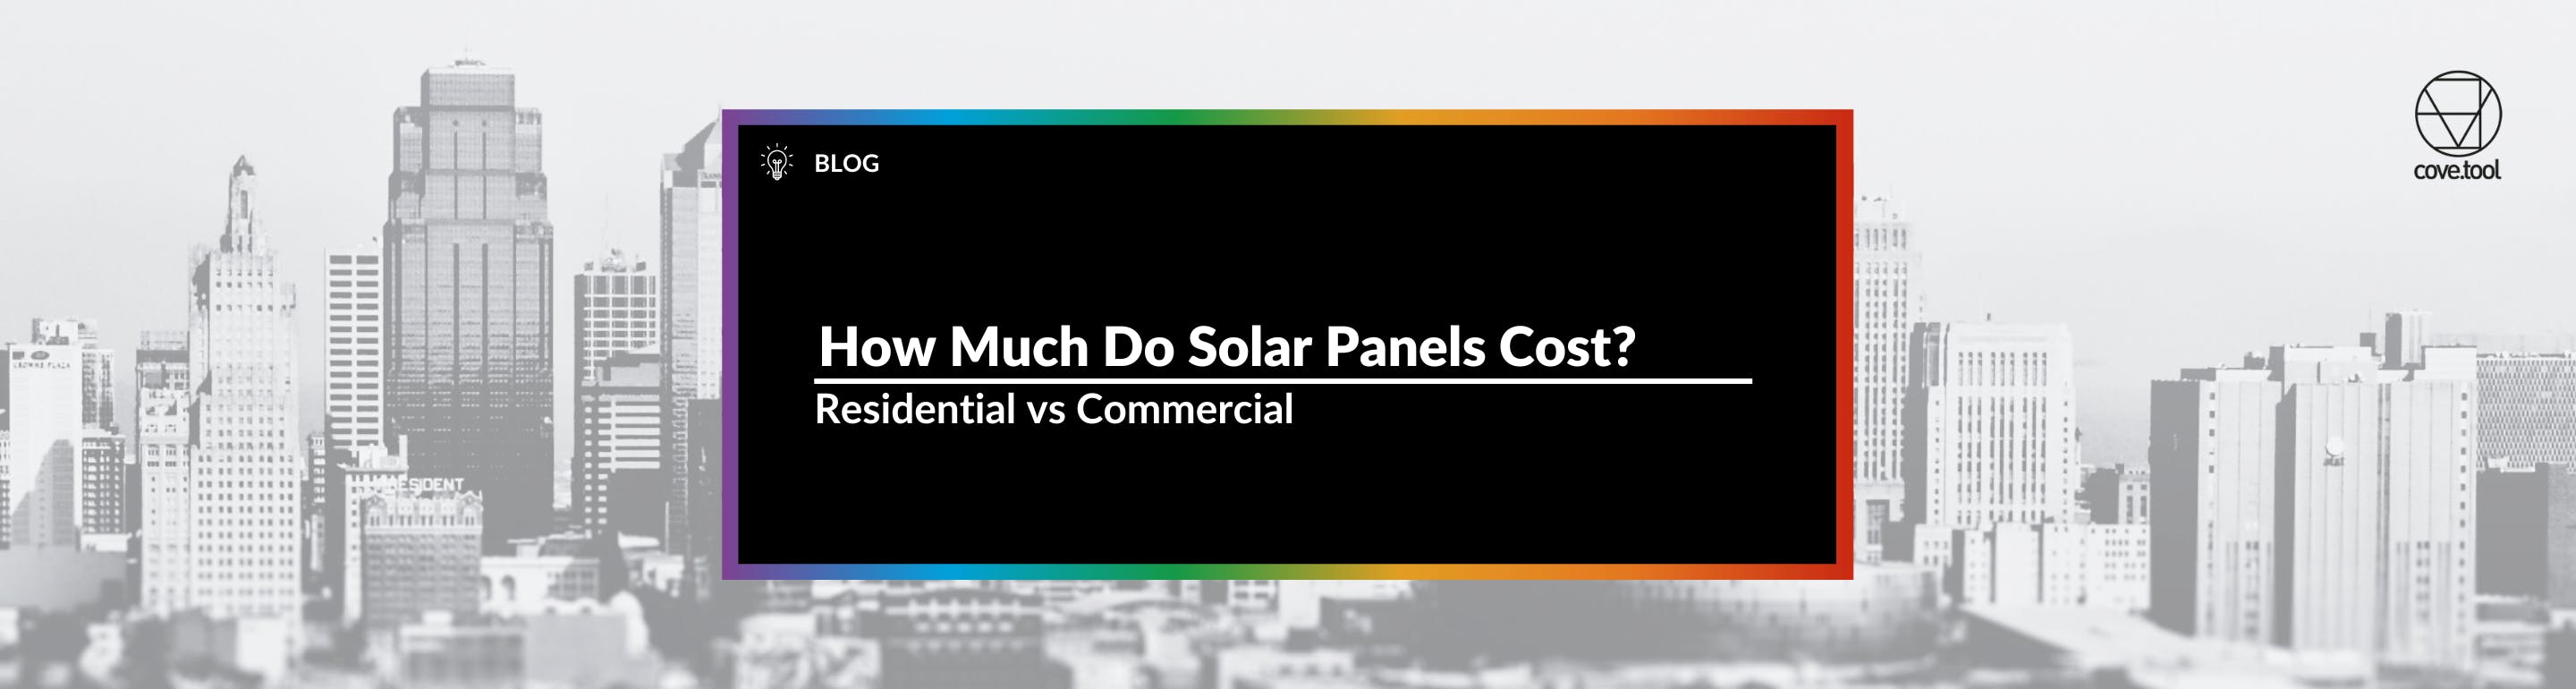 How Much Do Solar Panels Cost? Residential vs Commercial